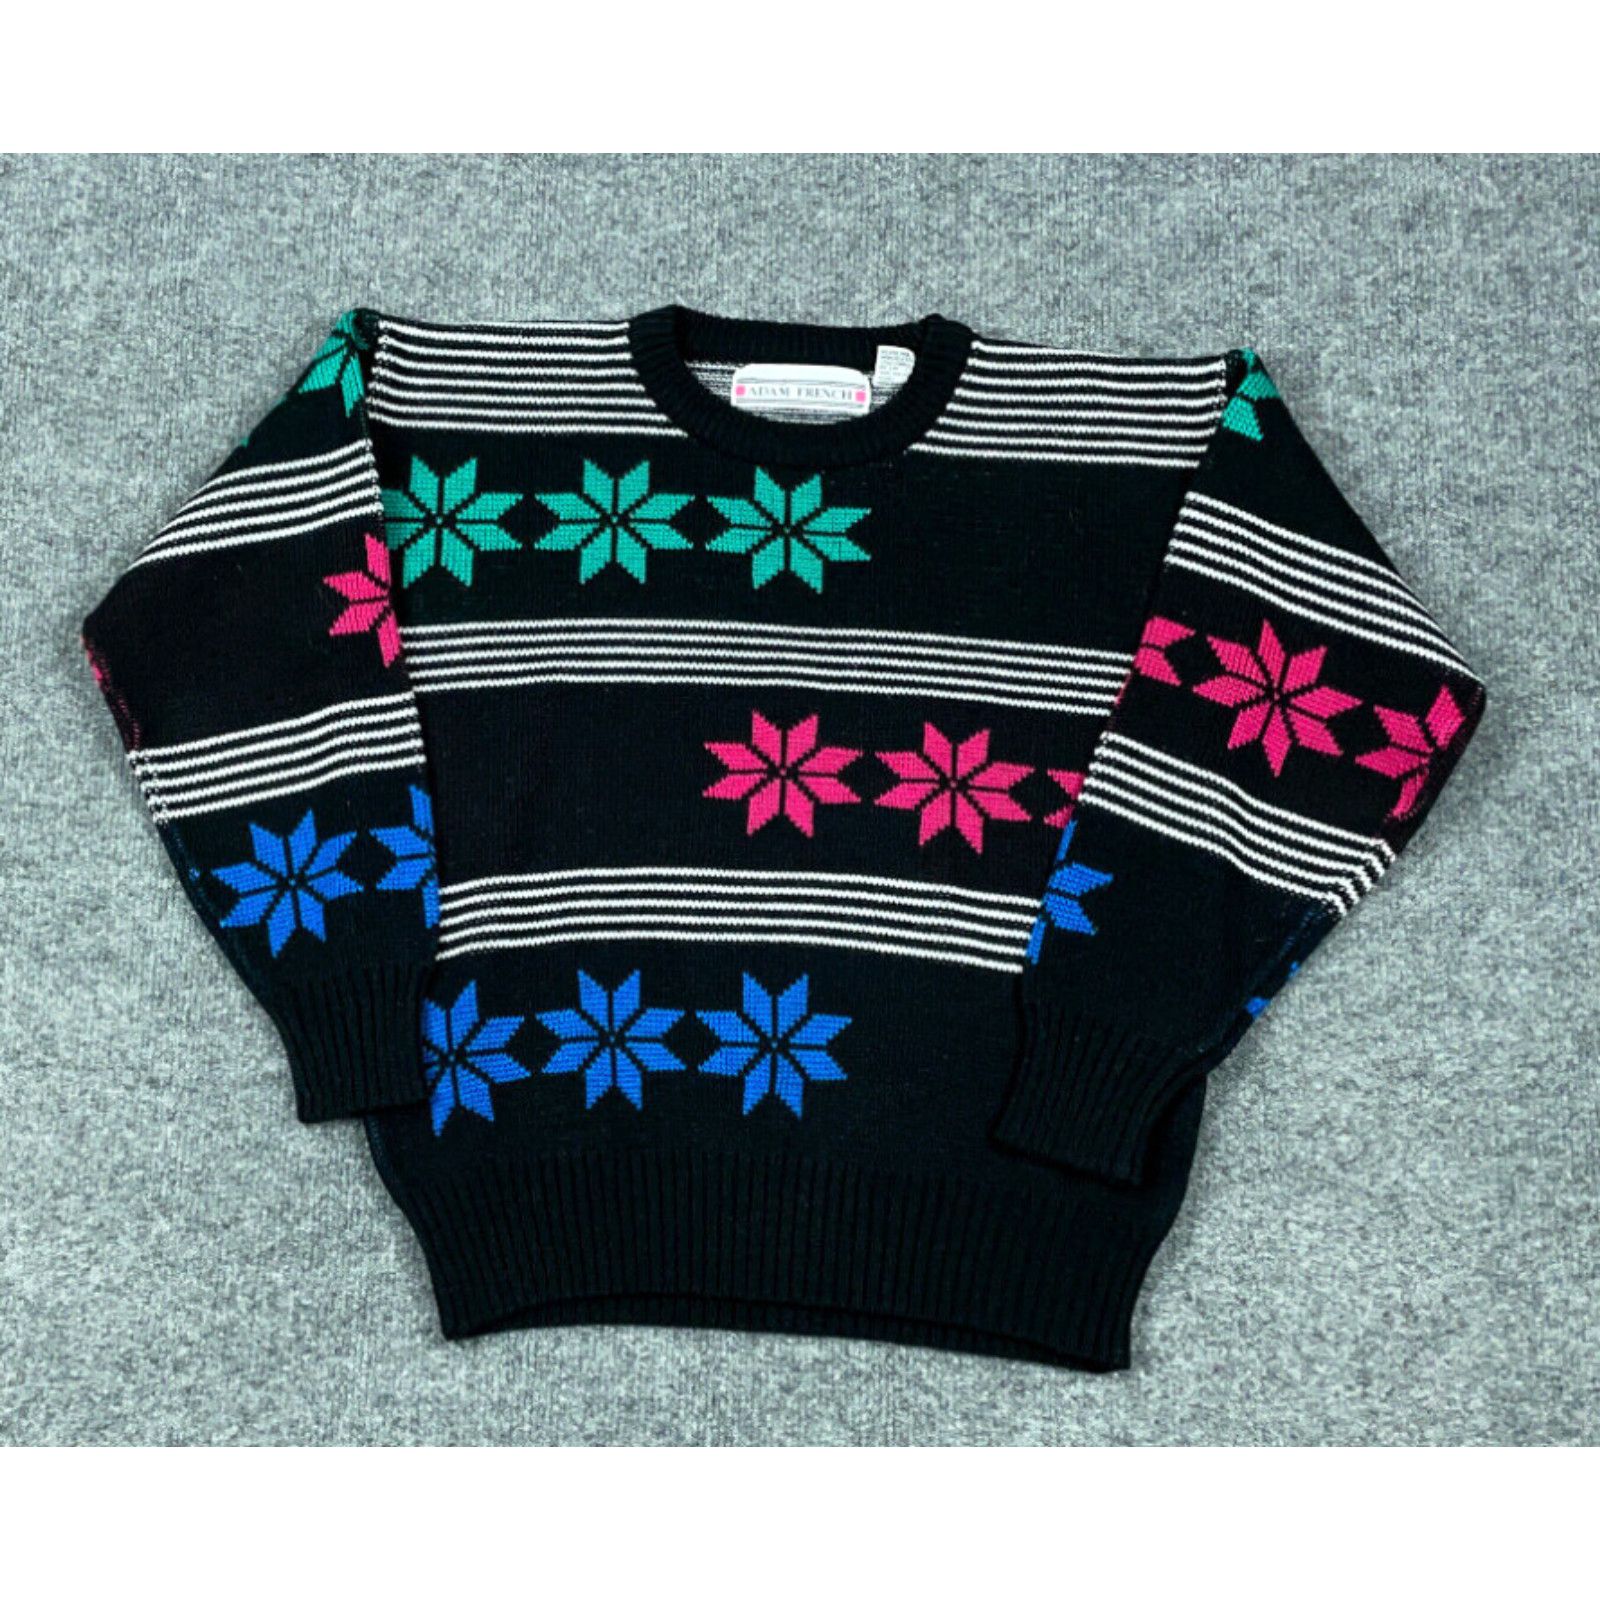 Vintage VTG 80s Black Colorful Snowflake Pullover Sweater Adult Small Hipster Geometric Size US S / EU 44-46 / 1 - 1 Preview